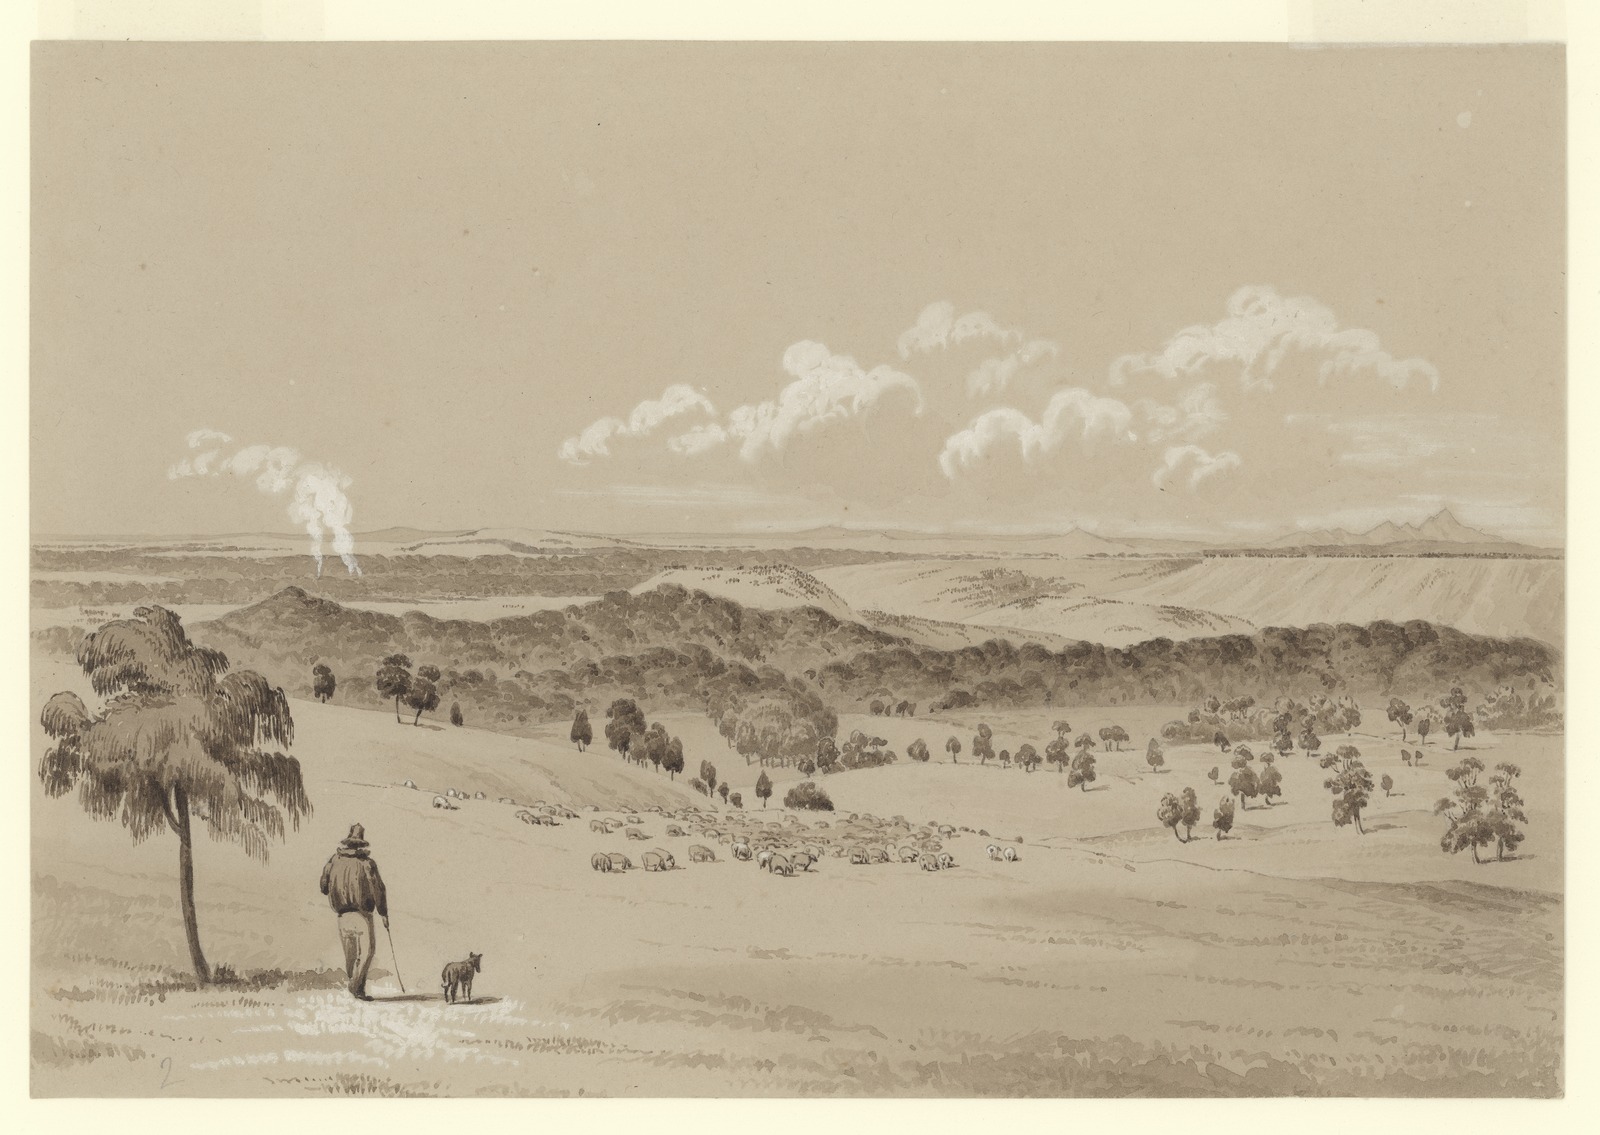 A sepia wash drawing of a man walking with his dog through a hilly area with sheep grazing in front and smoke from a village.